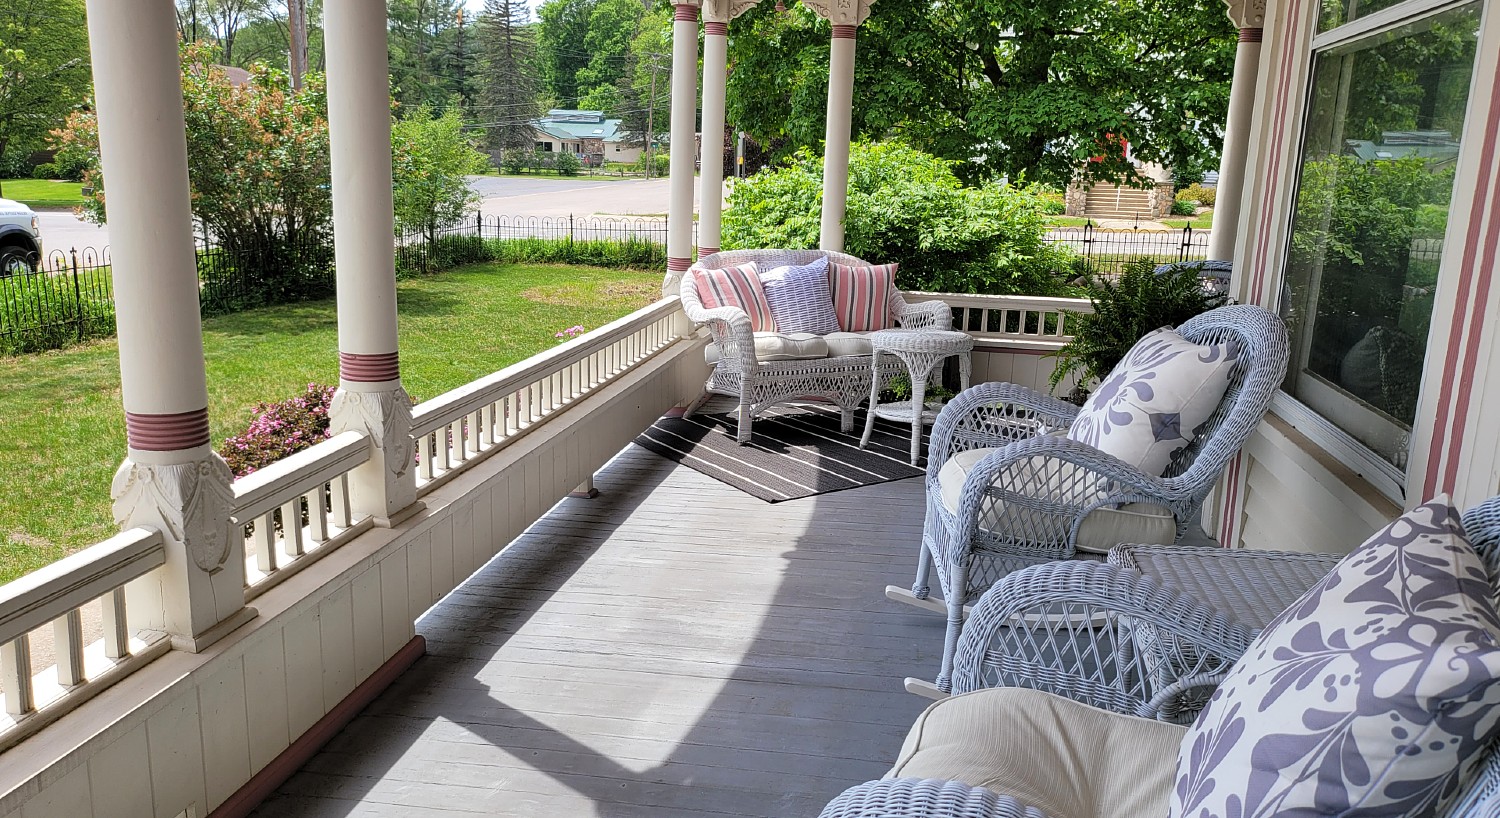 Spacious outside front porch with grey wicker furniture overlooking lawn and street